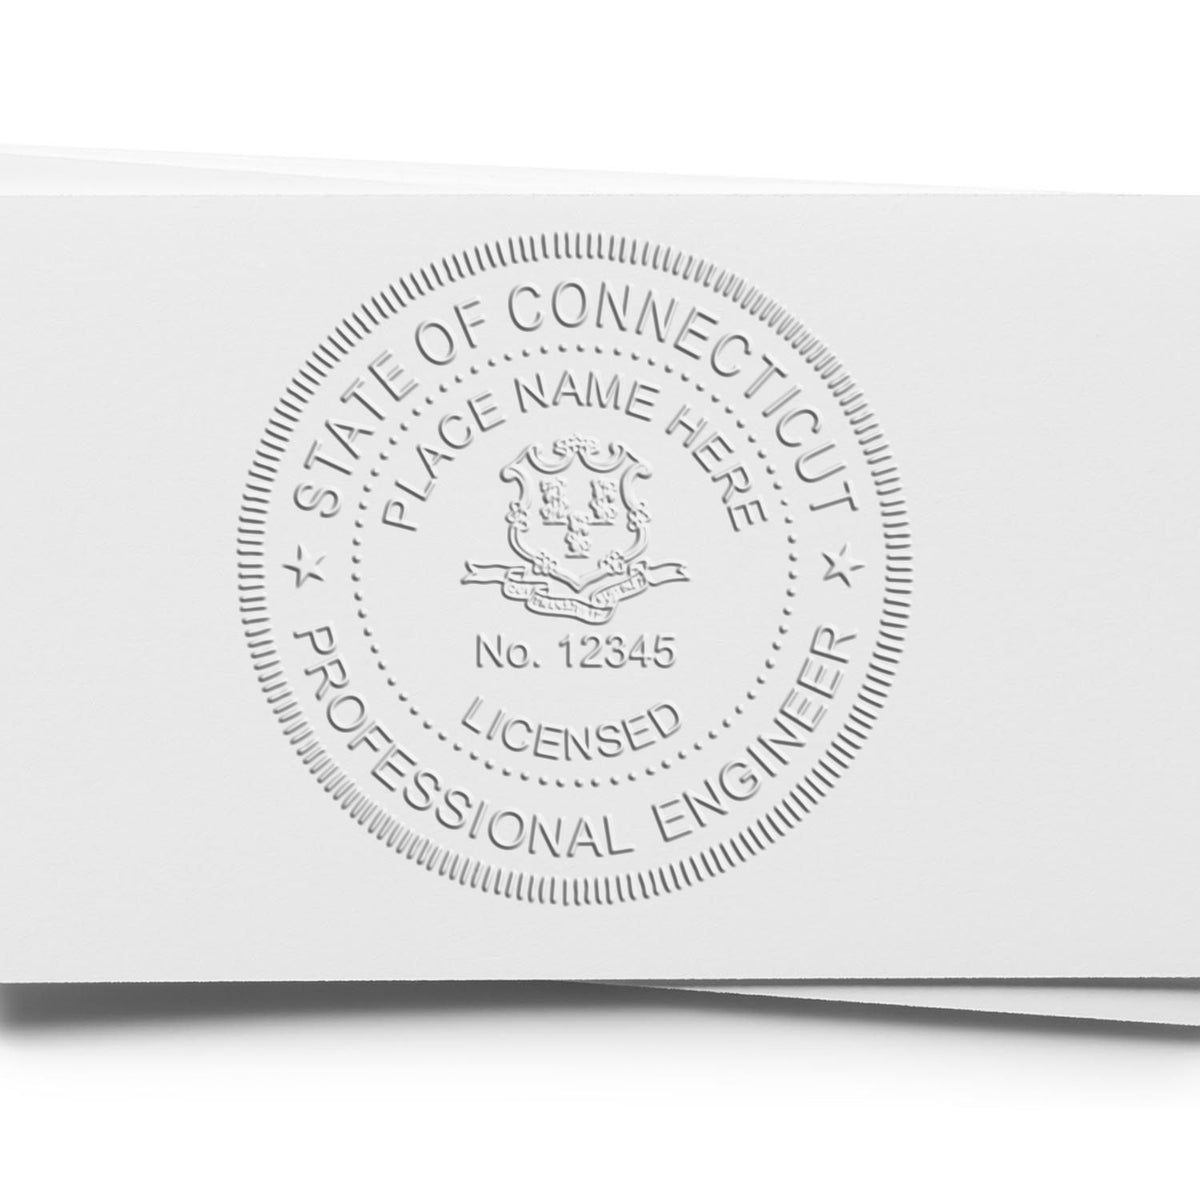 A photograph of the Hybrid Connecticut Engineer Seal stamp impression reveals a vivid, professional image of the on paper.